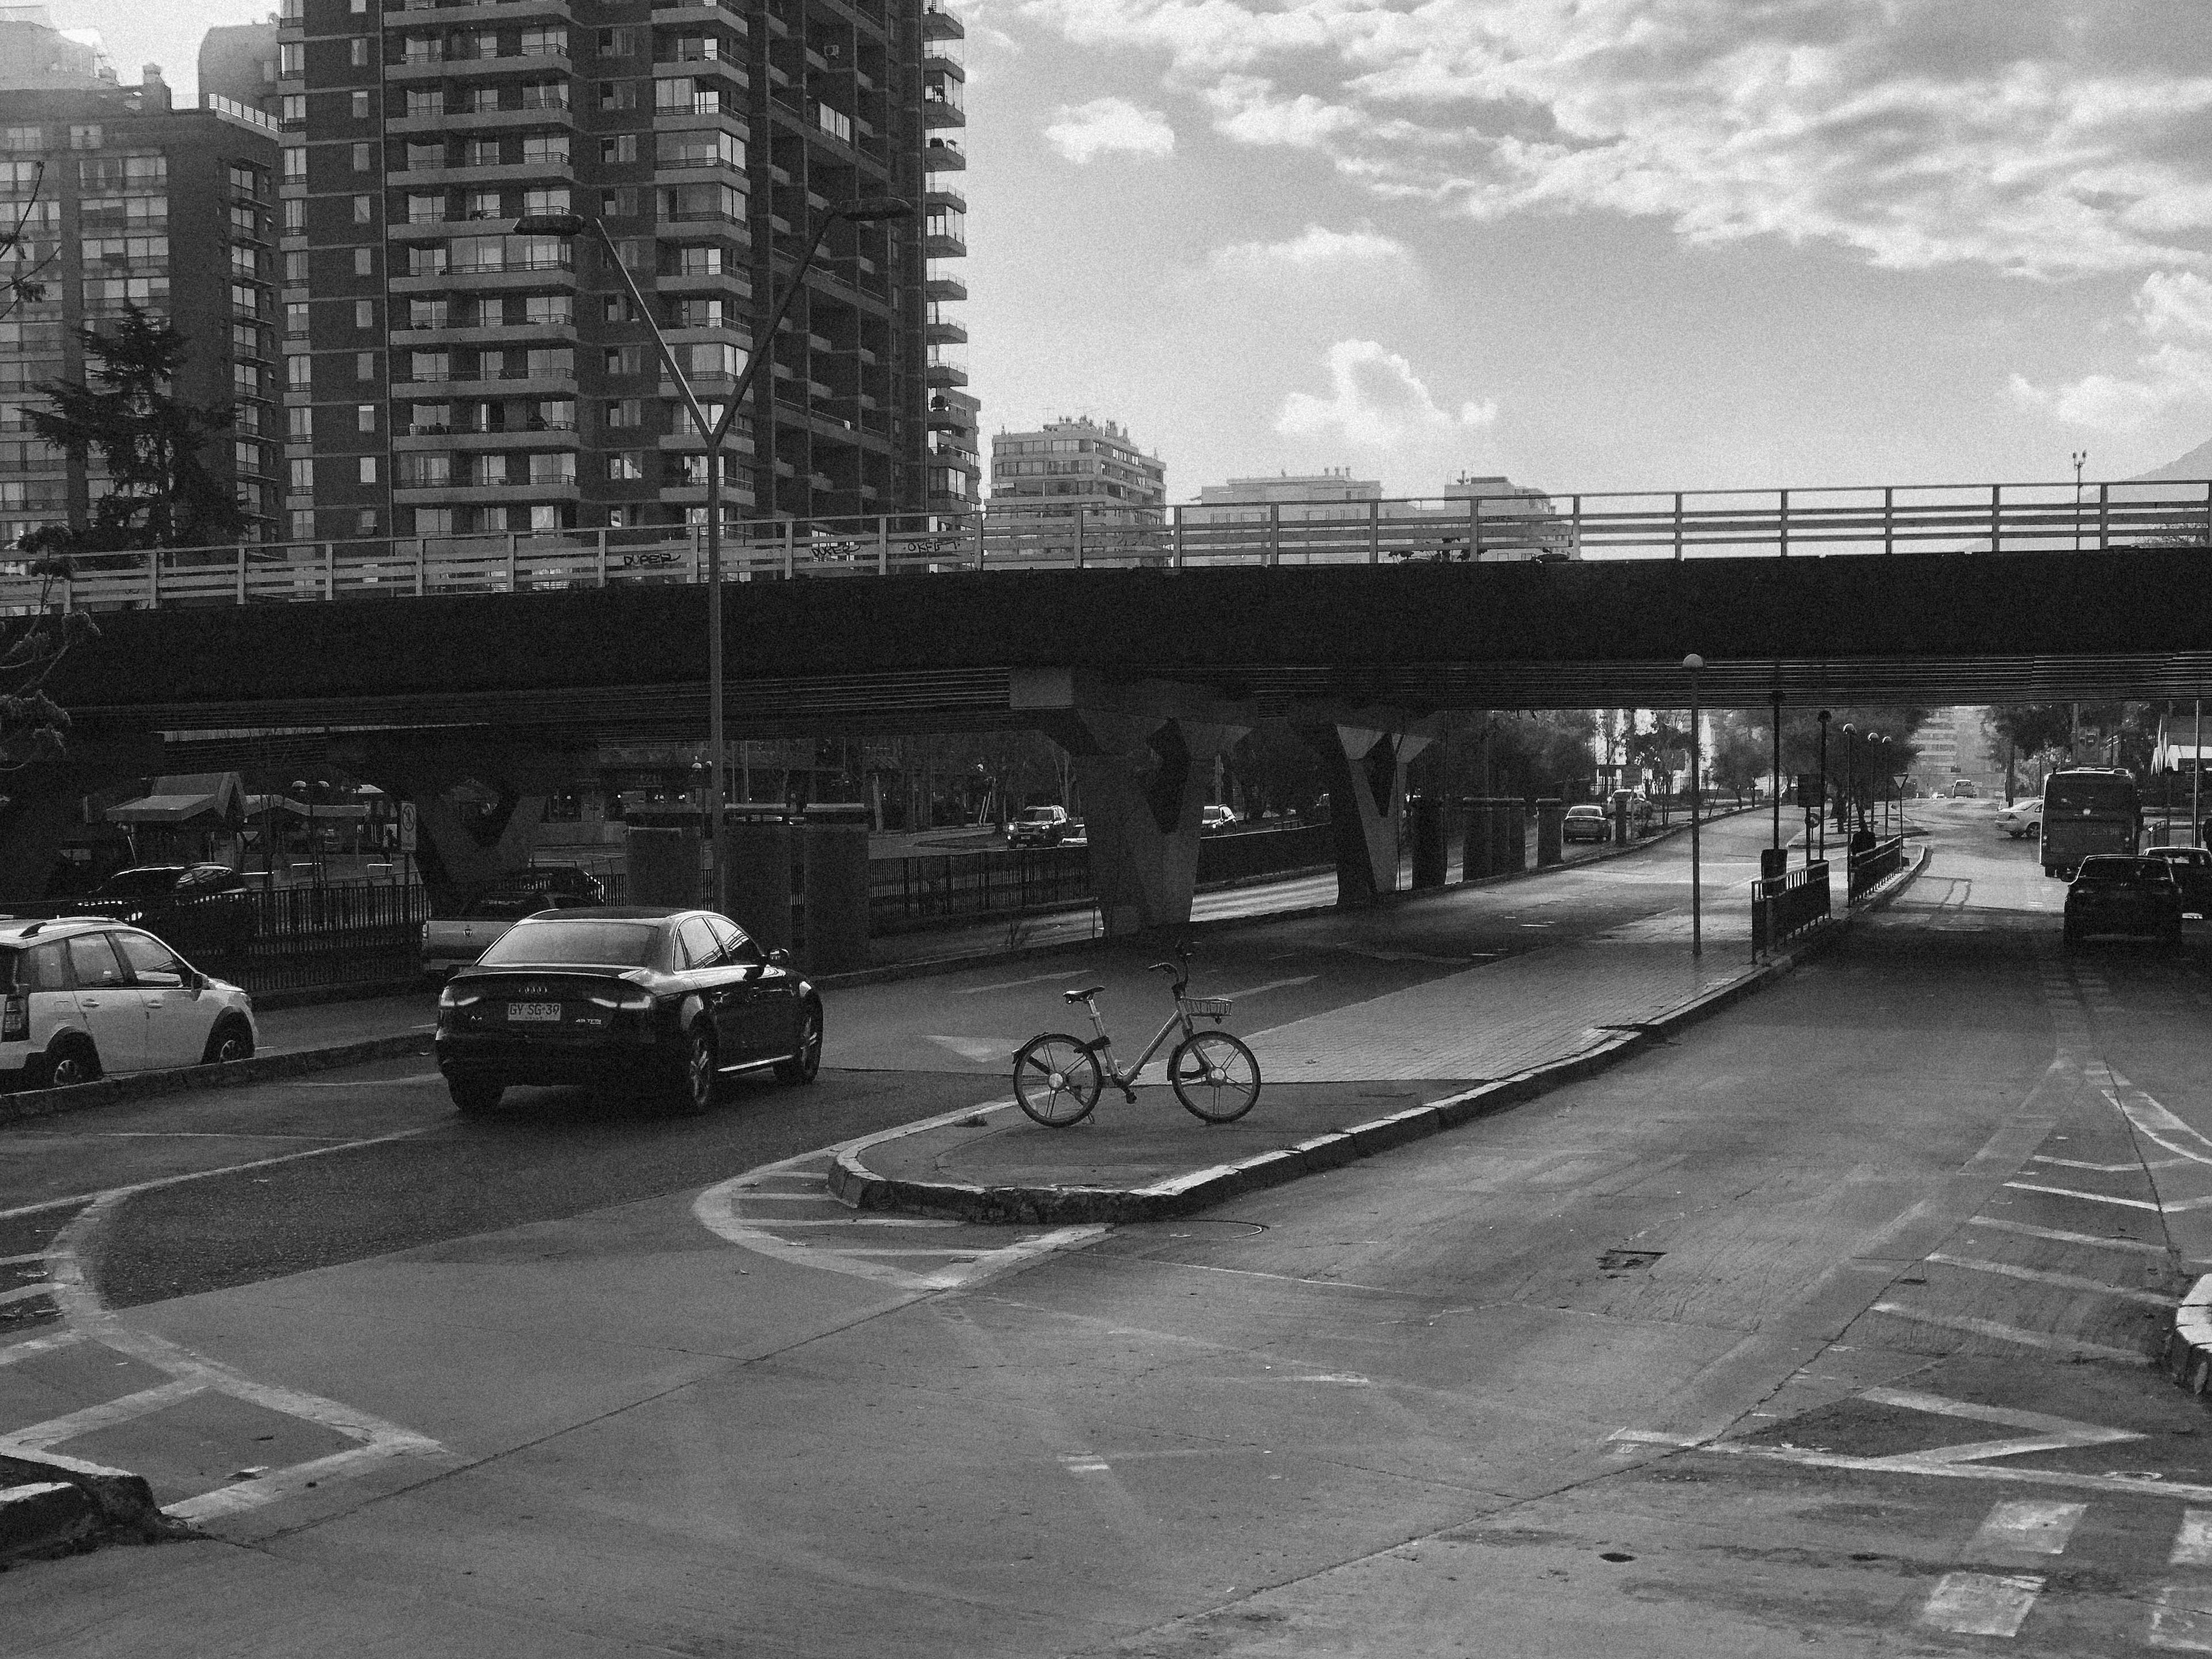 Black and white picture of a shared bicycle left alone in a small concrete island between car lanes. Noisy, low-contrast image.